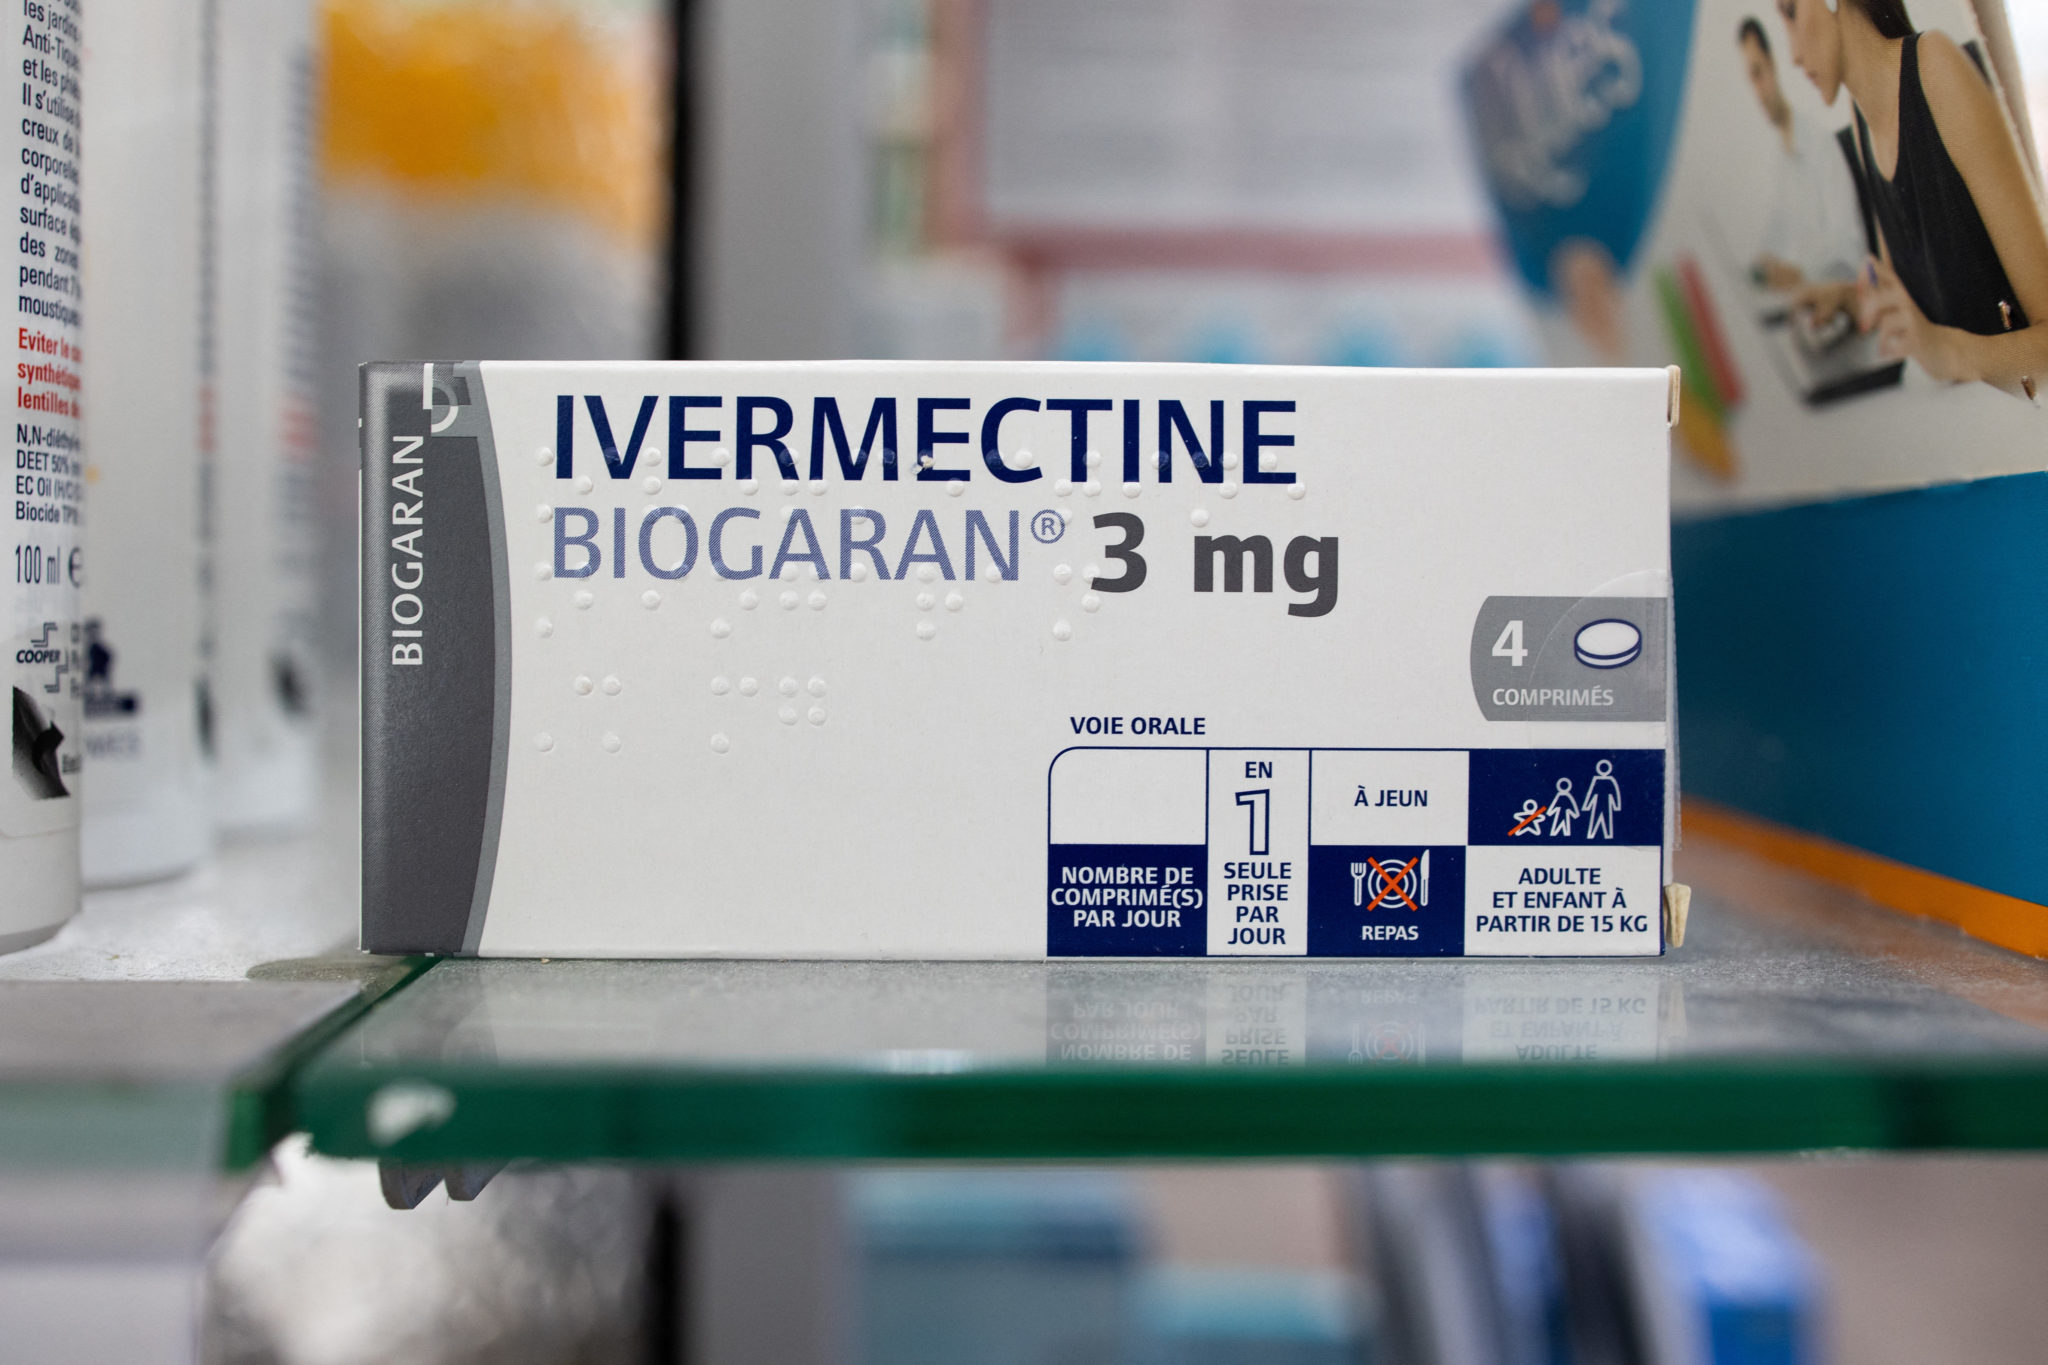 Main image shows a box of Ivermectine drug in a pharmacy in Paris, 16-04-2021. Image: Lafargue Raphael/ABACA/ABACA/PA Images